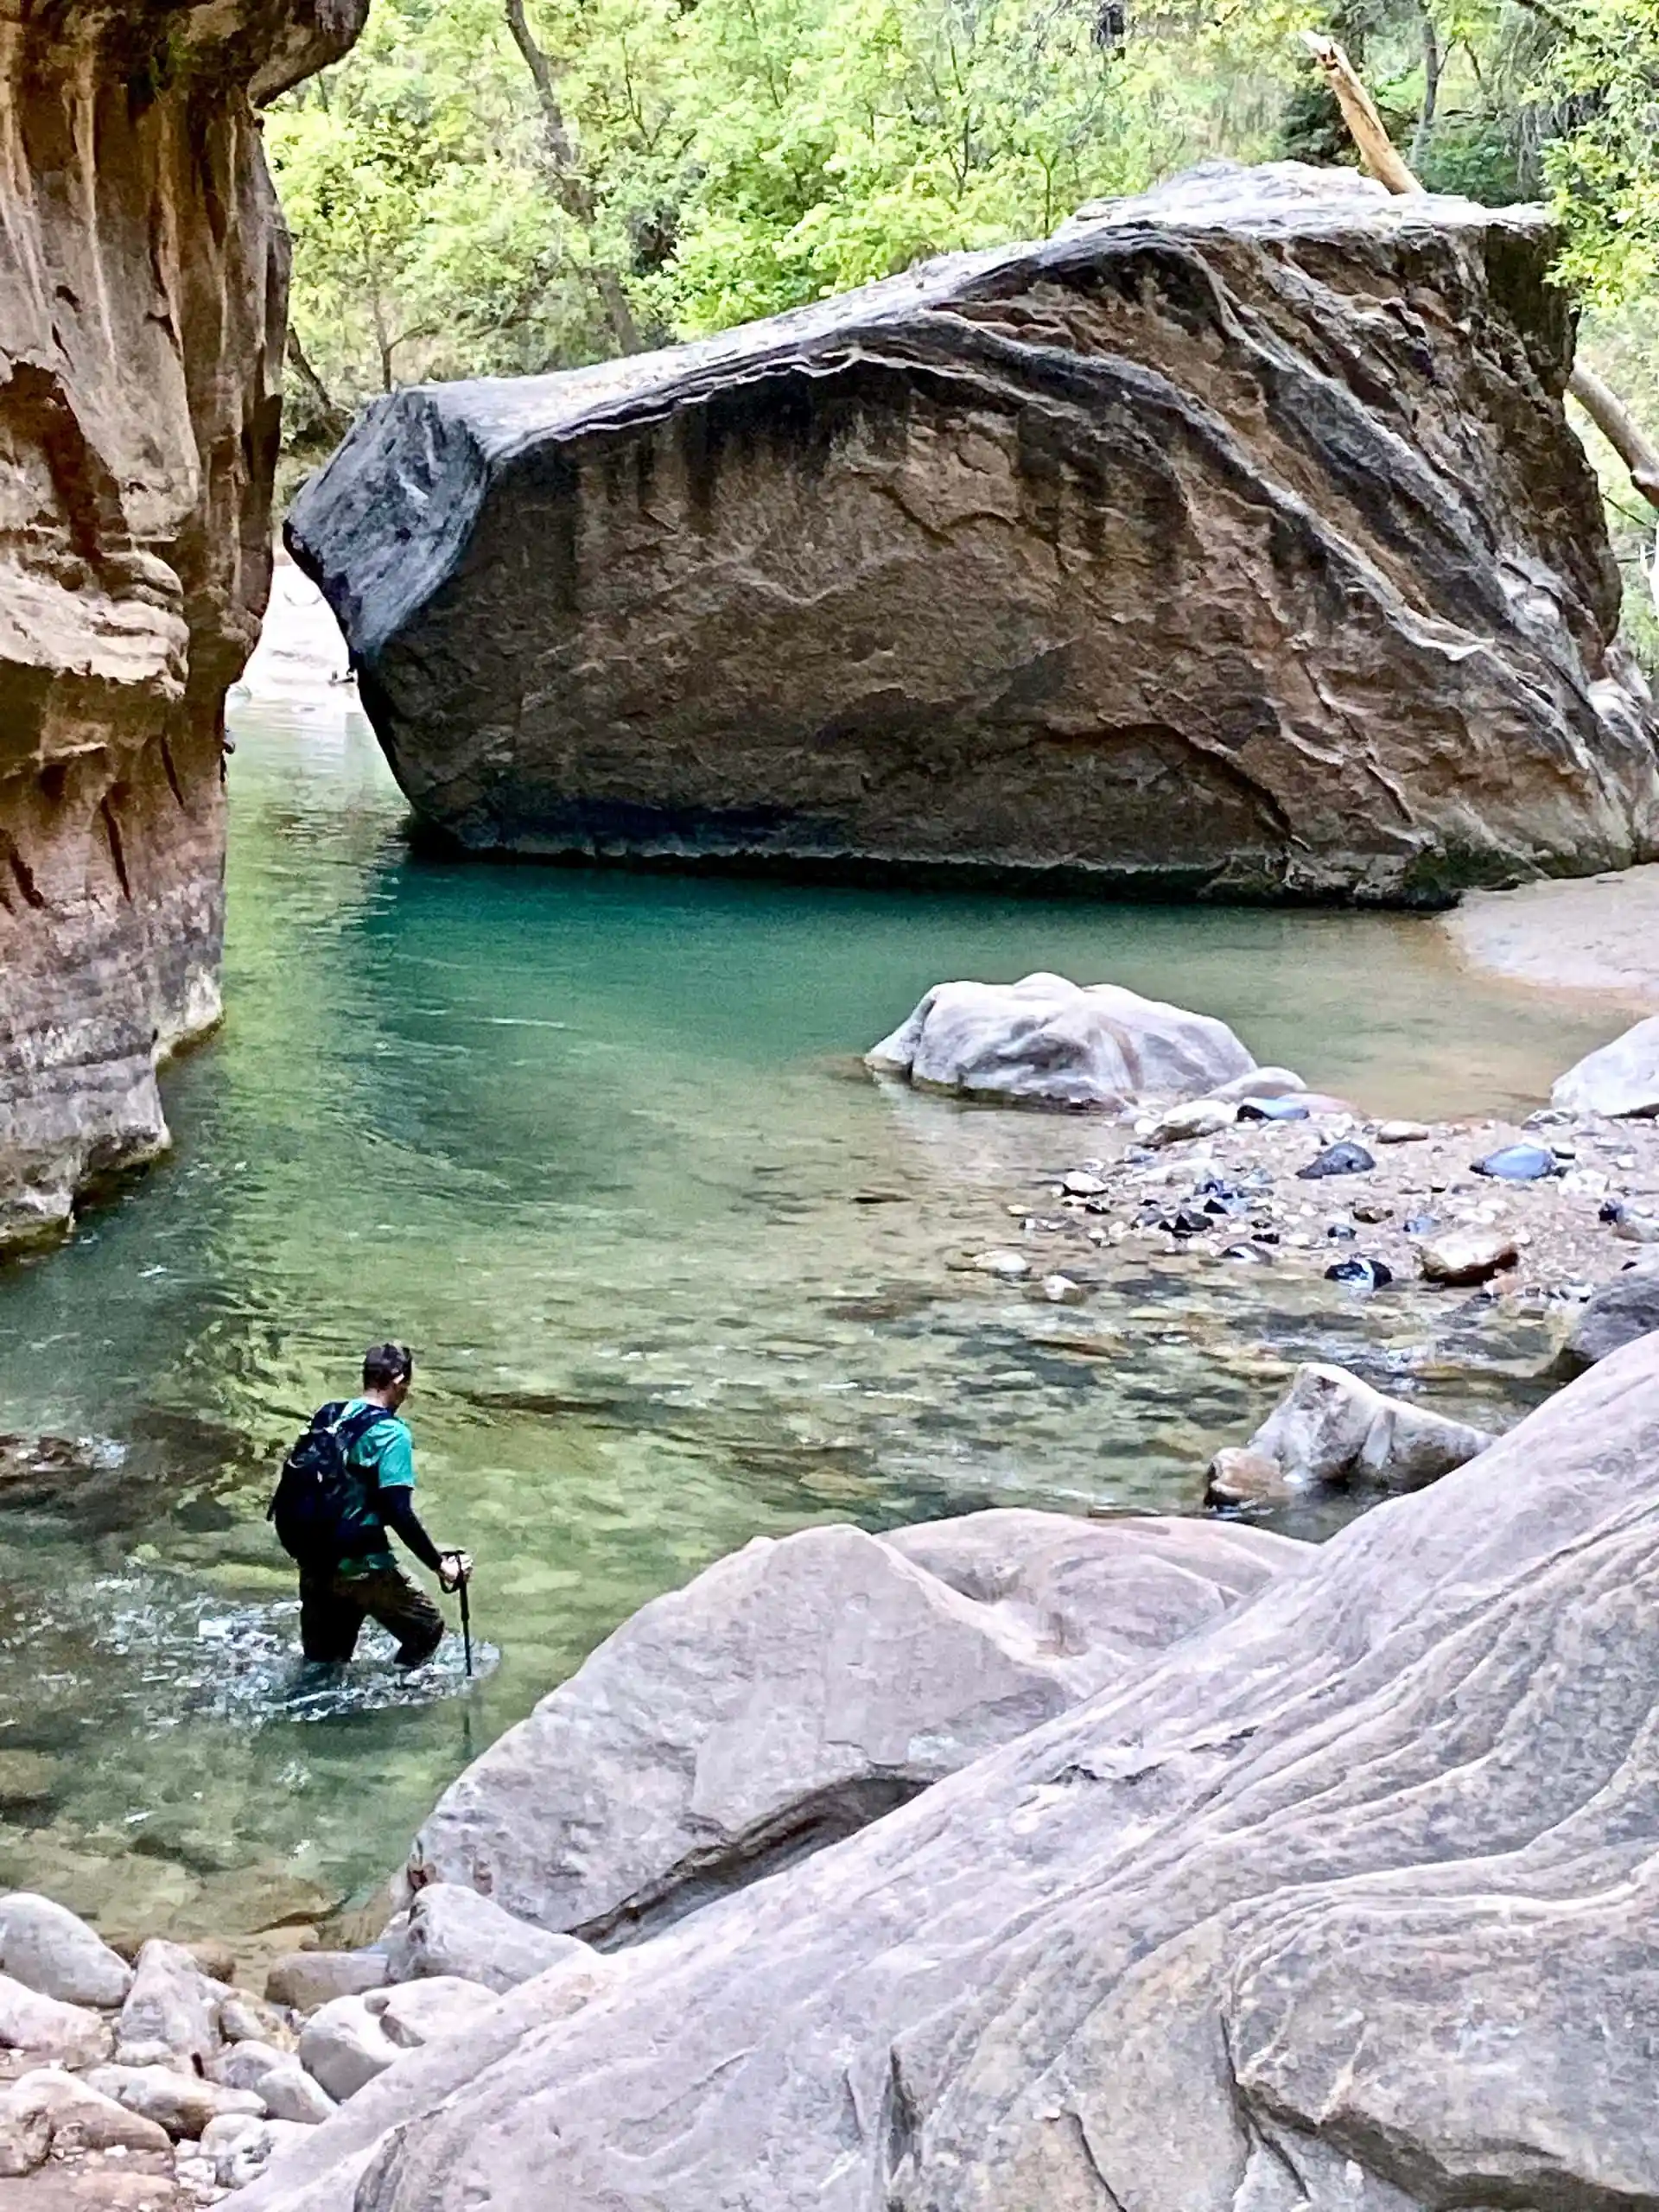 Keith is hiking near a massive boulder in the Virgin River